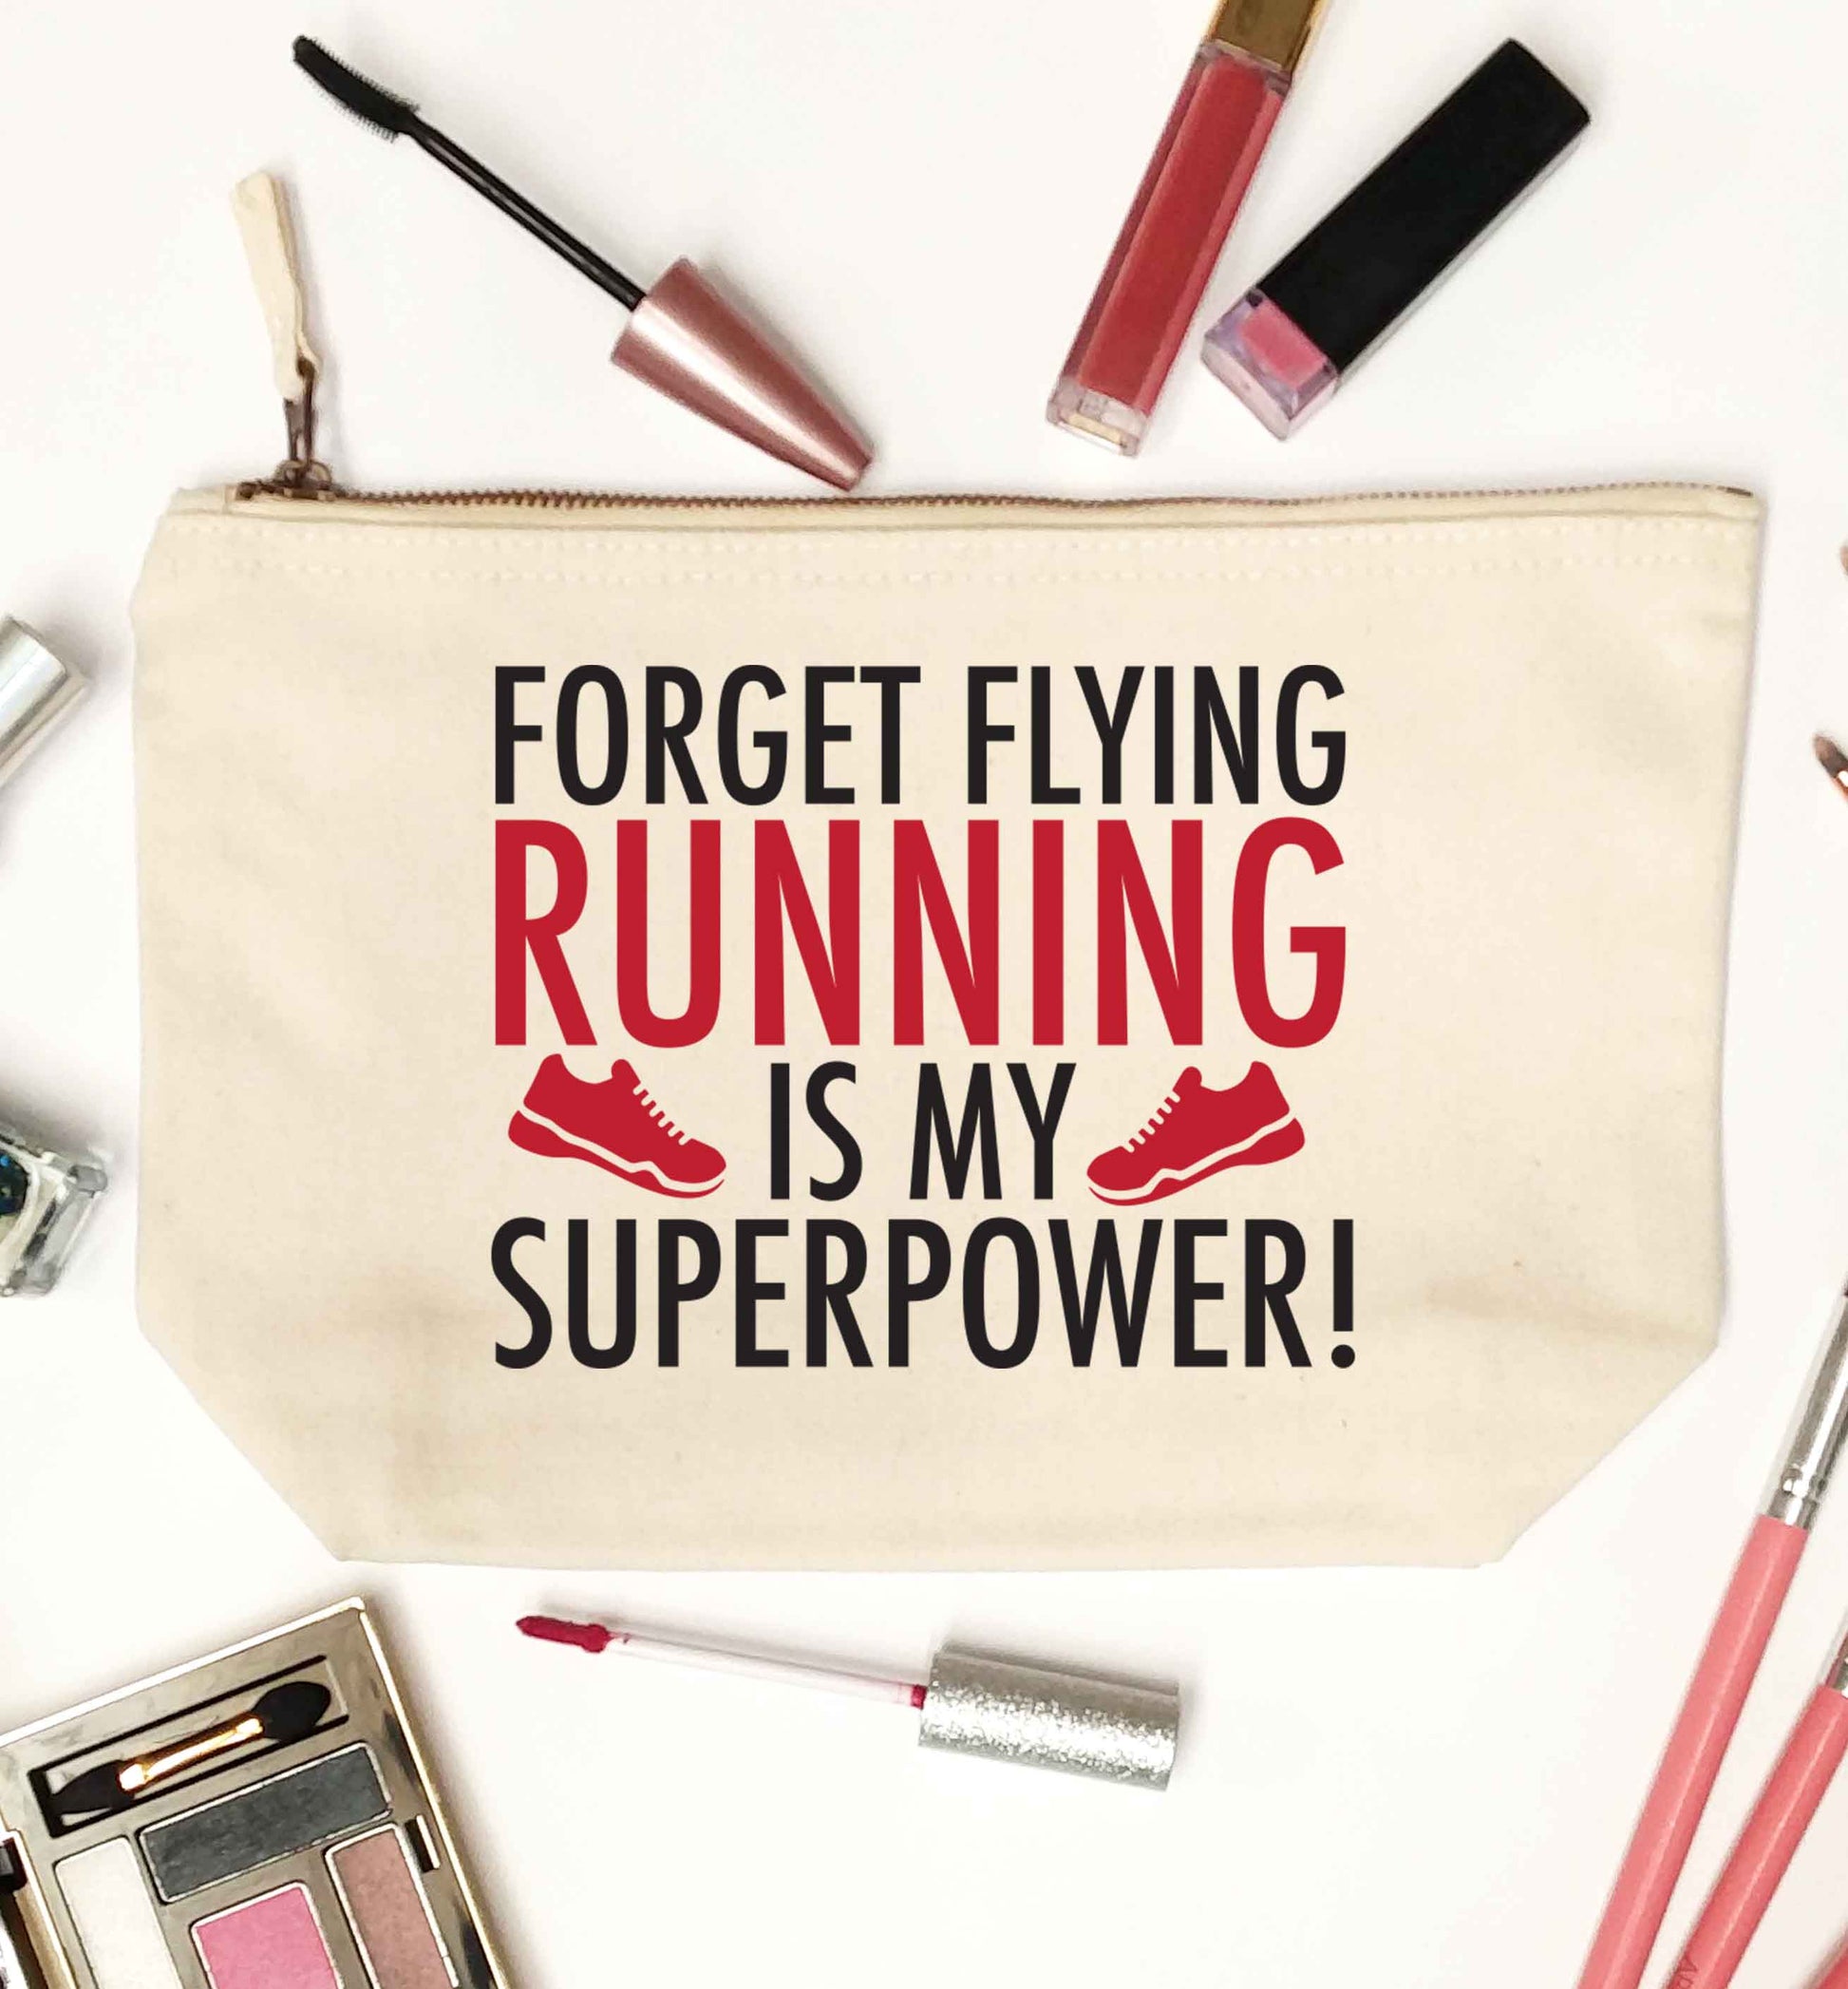 Forget flying running is my superpower natural makeup bag